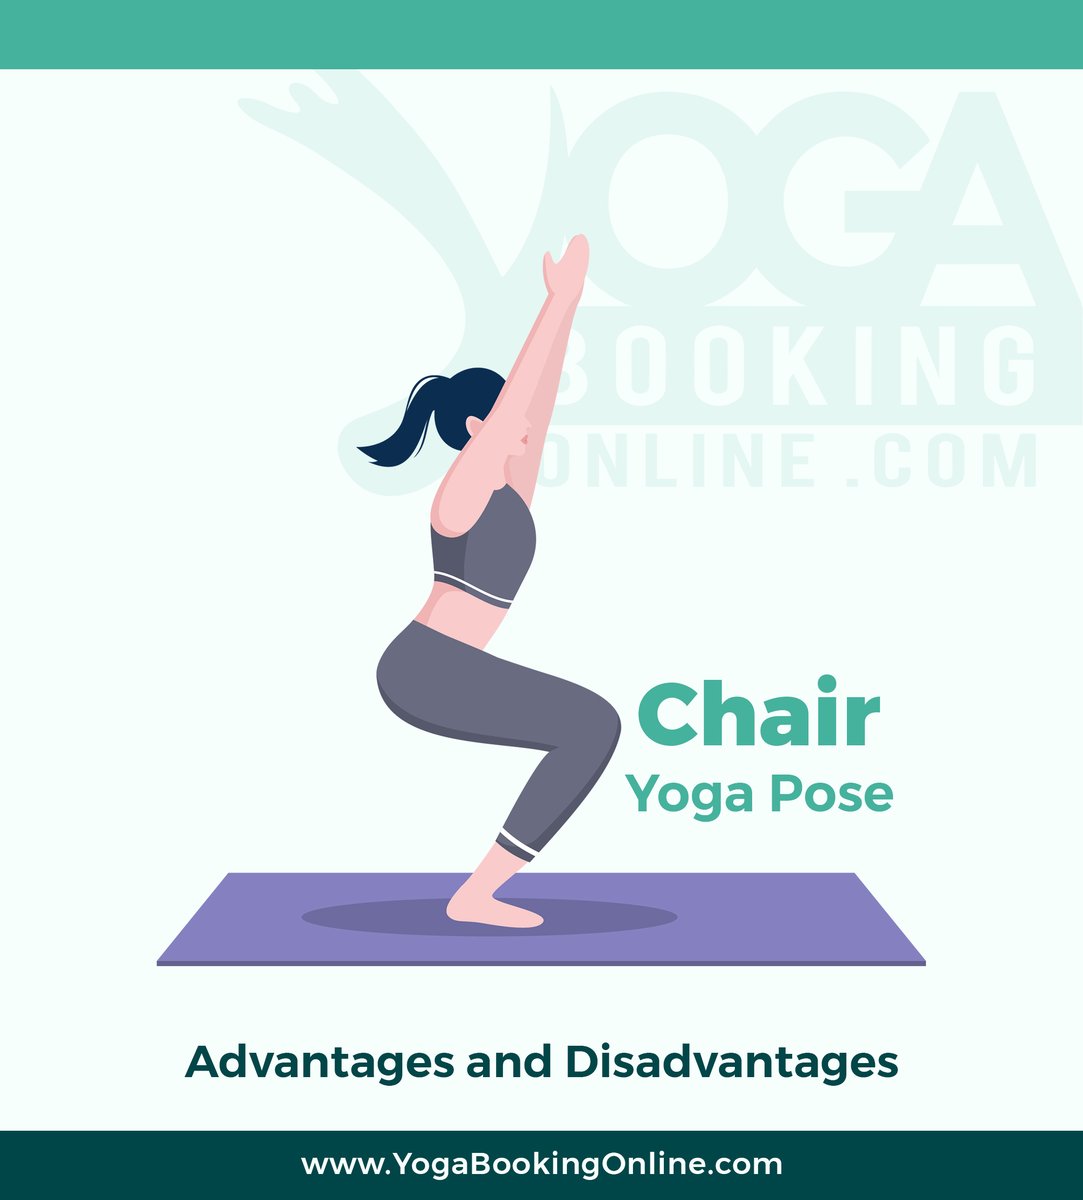 Try the Chair Yoga Pose for a low-impact workout! Strengthen your legs, improve balance, reduce stress, and enjoy yoga from a chair.

#ChairYoga #Utkatasana #SeatedYoga #LowImpactWorkout #LegStrengthening #BalanceImprovement #StressReduction #yogabookingonline #LimitedMobility